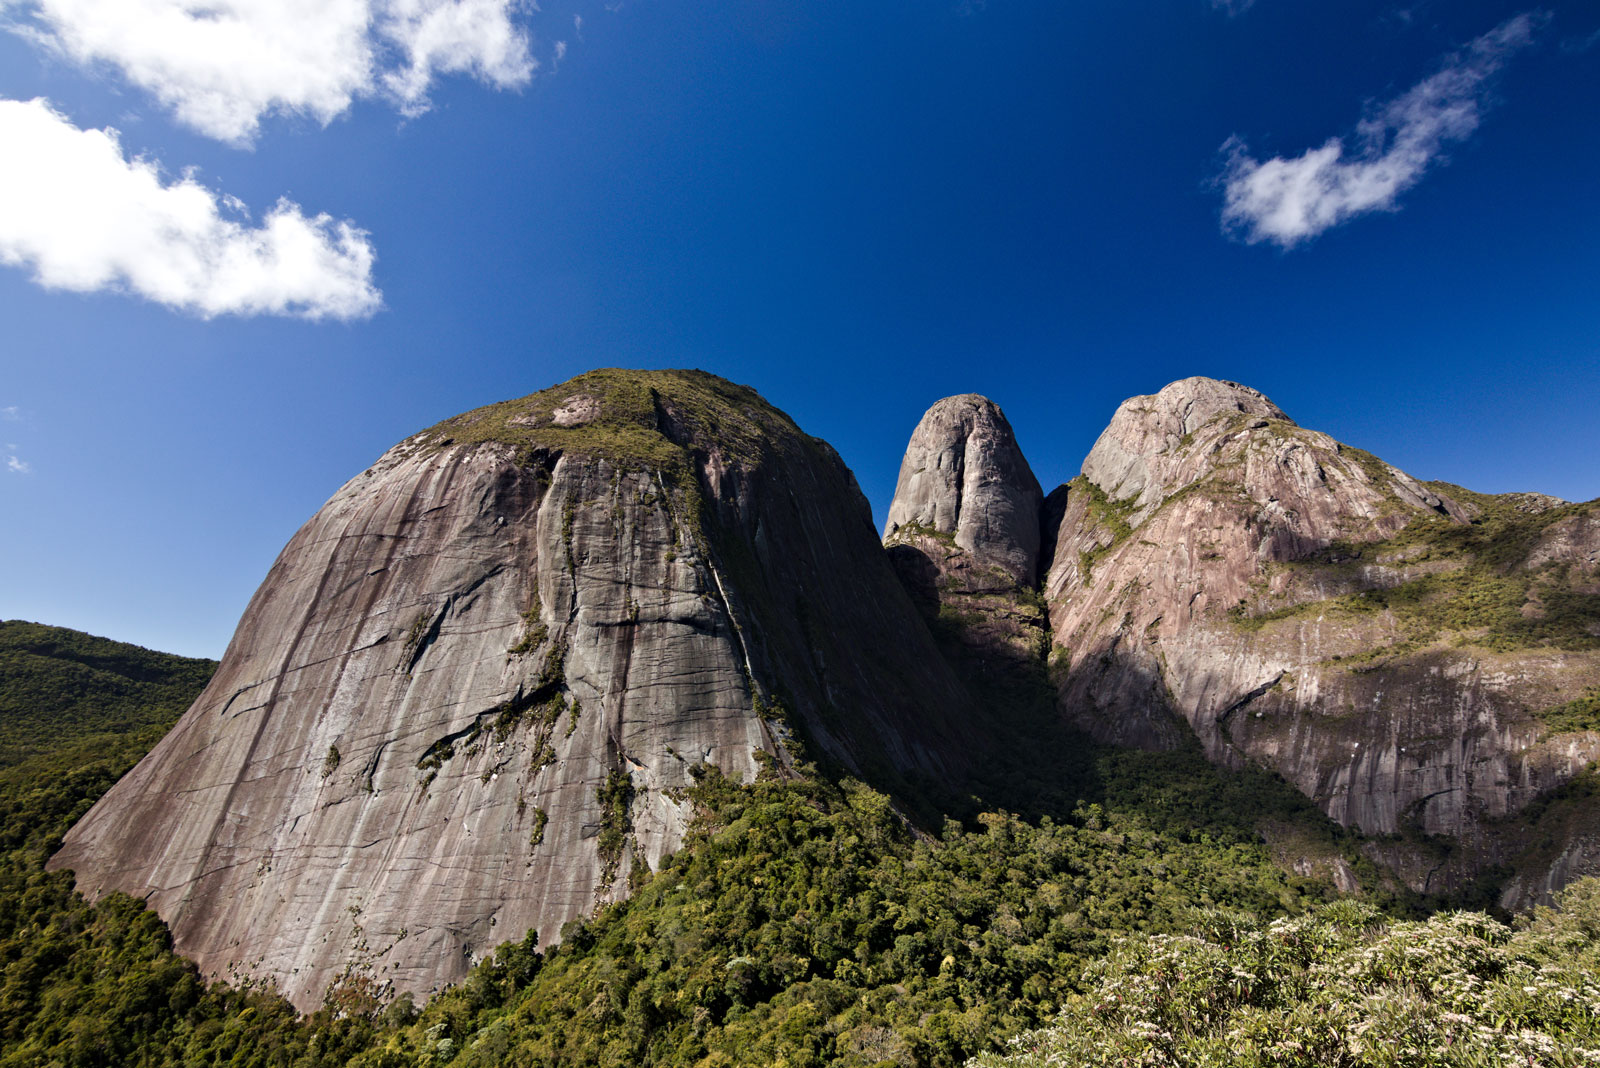 Found a slightly better composition of the Três Picos with PRO1D+ Instant Action C-PL at 11mm.